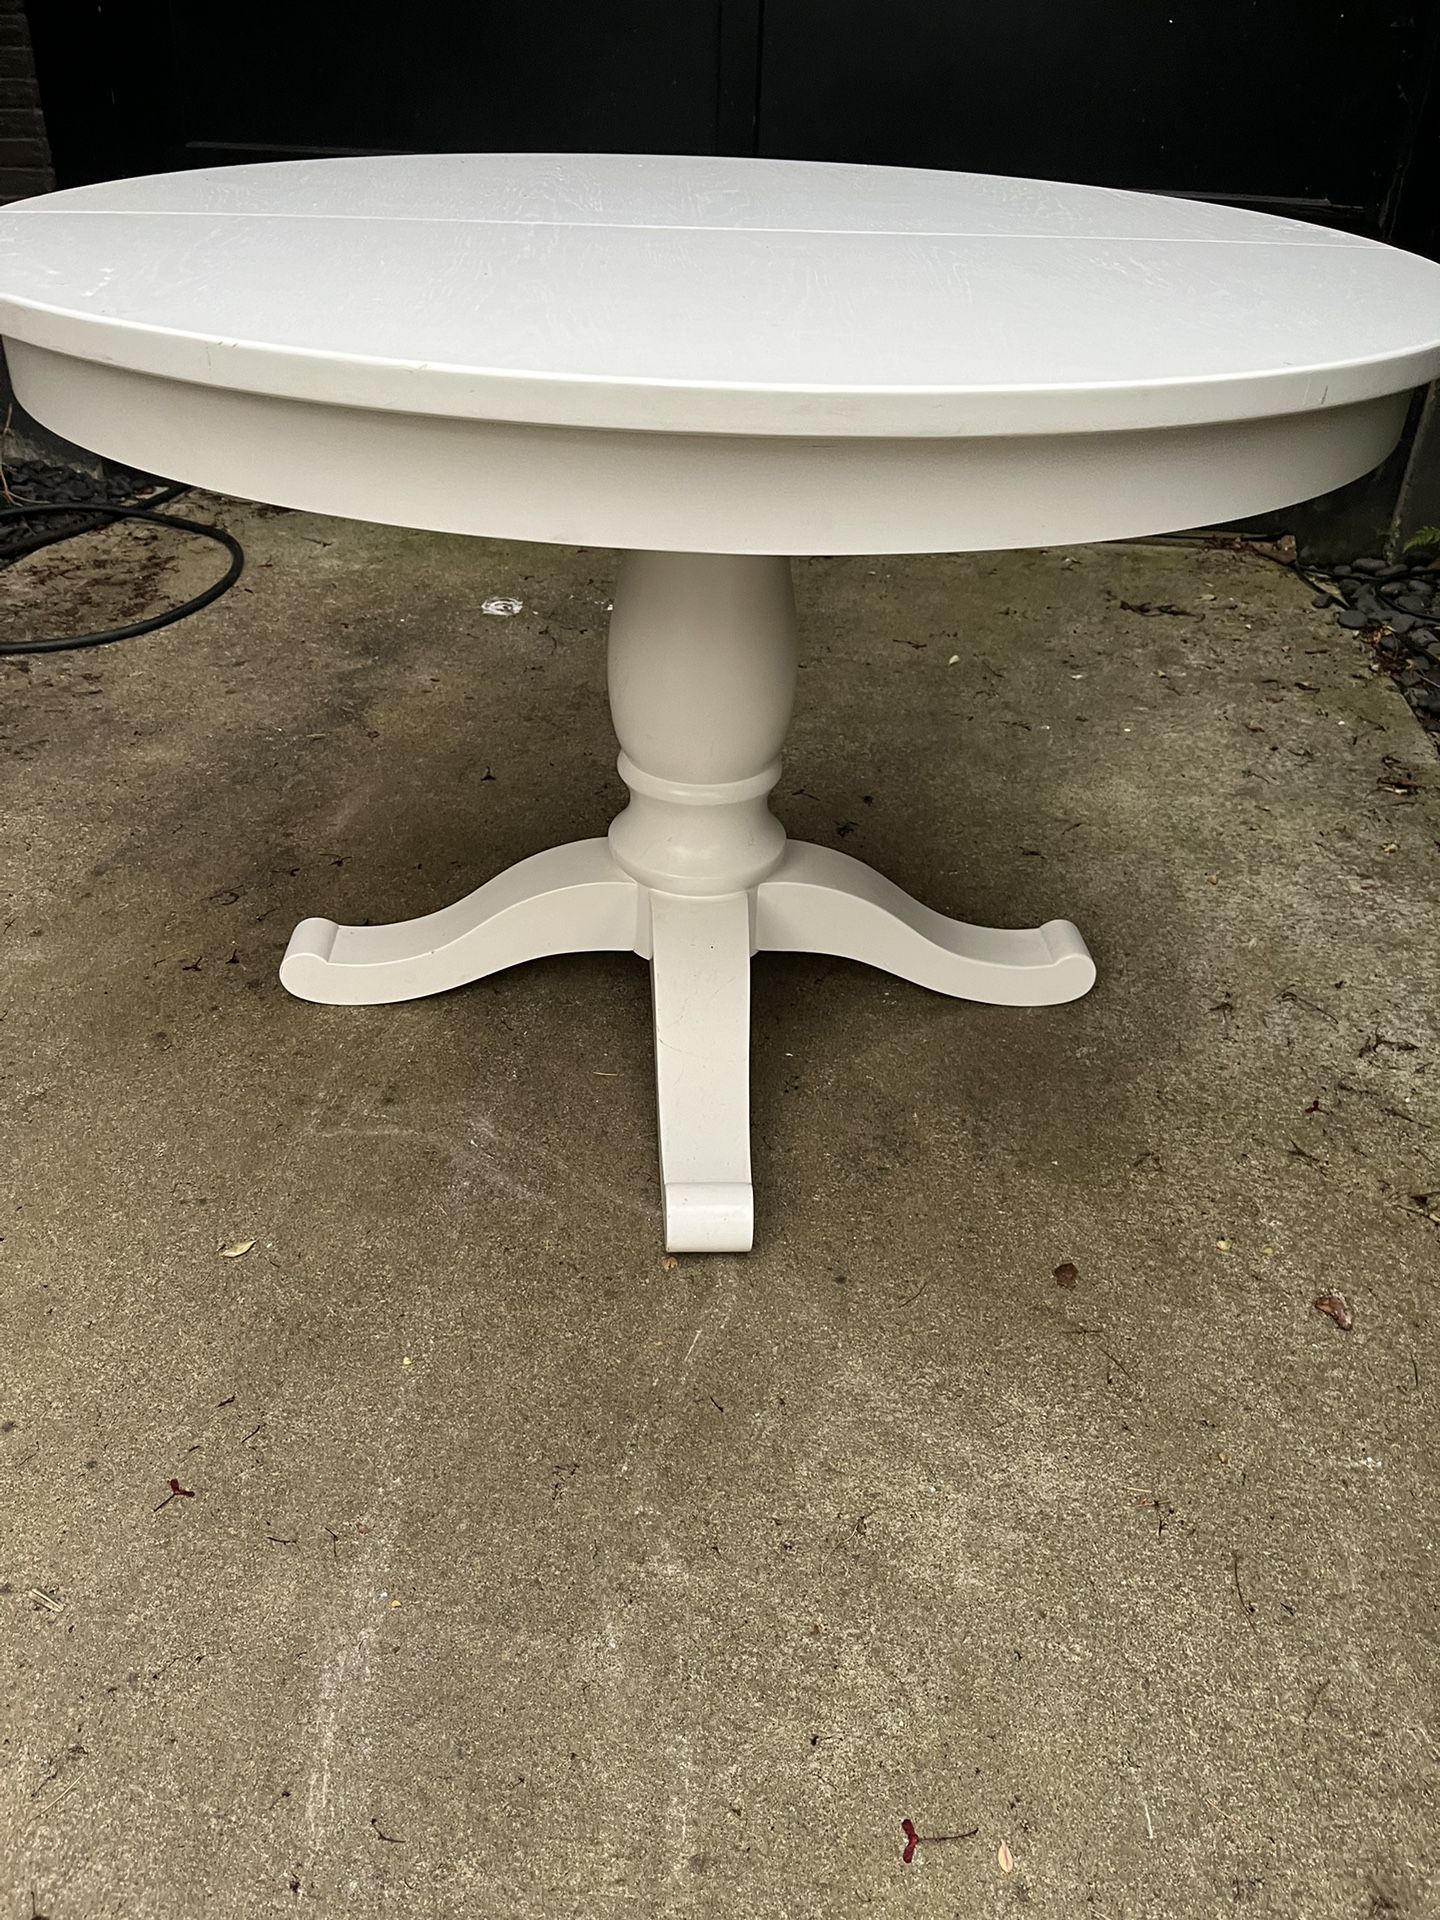 Pottery Barn Table With Extension 